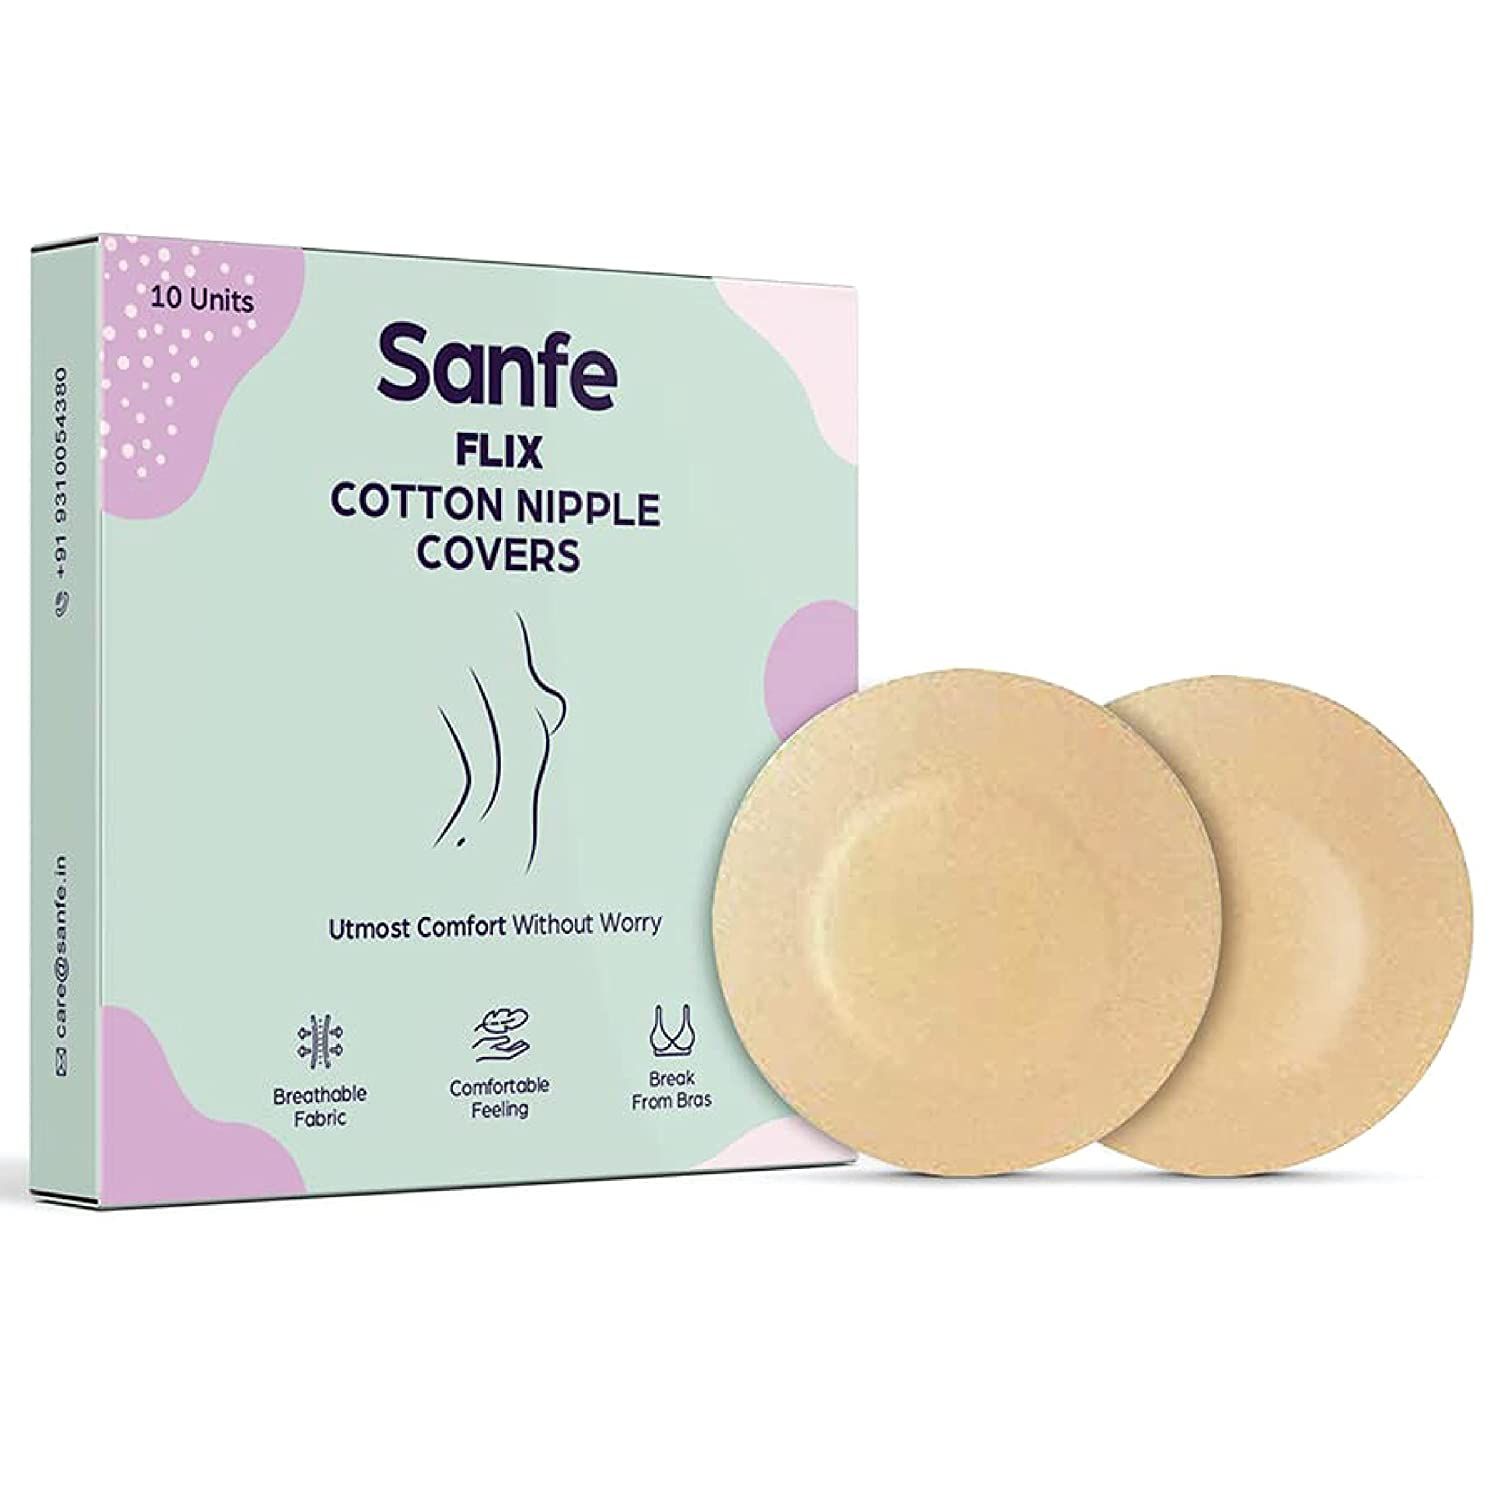 Sanfe Flix Cotton Nipple Covers, 10 Breathable Nipple Pasties, No Show Bra  For Women, Skin Friendly Adhesive, disposable